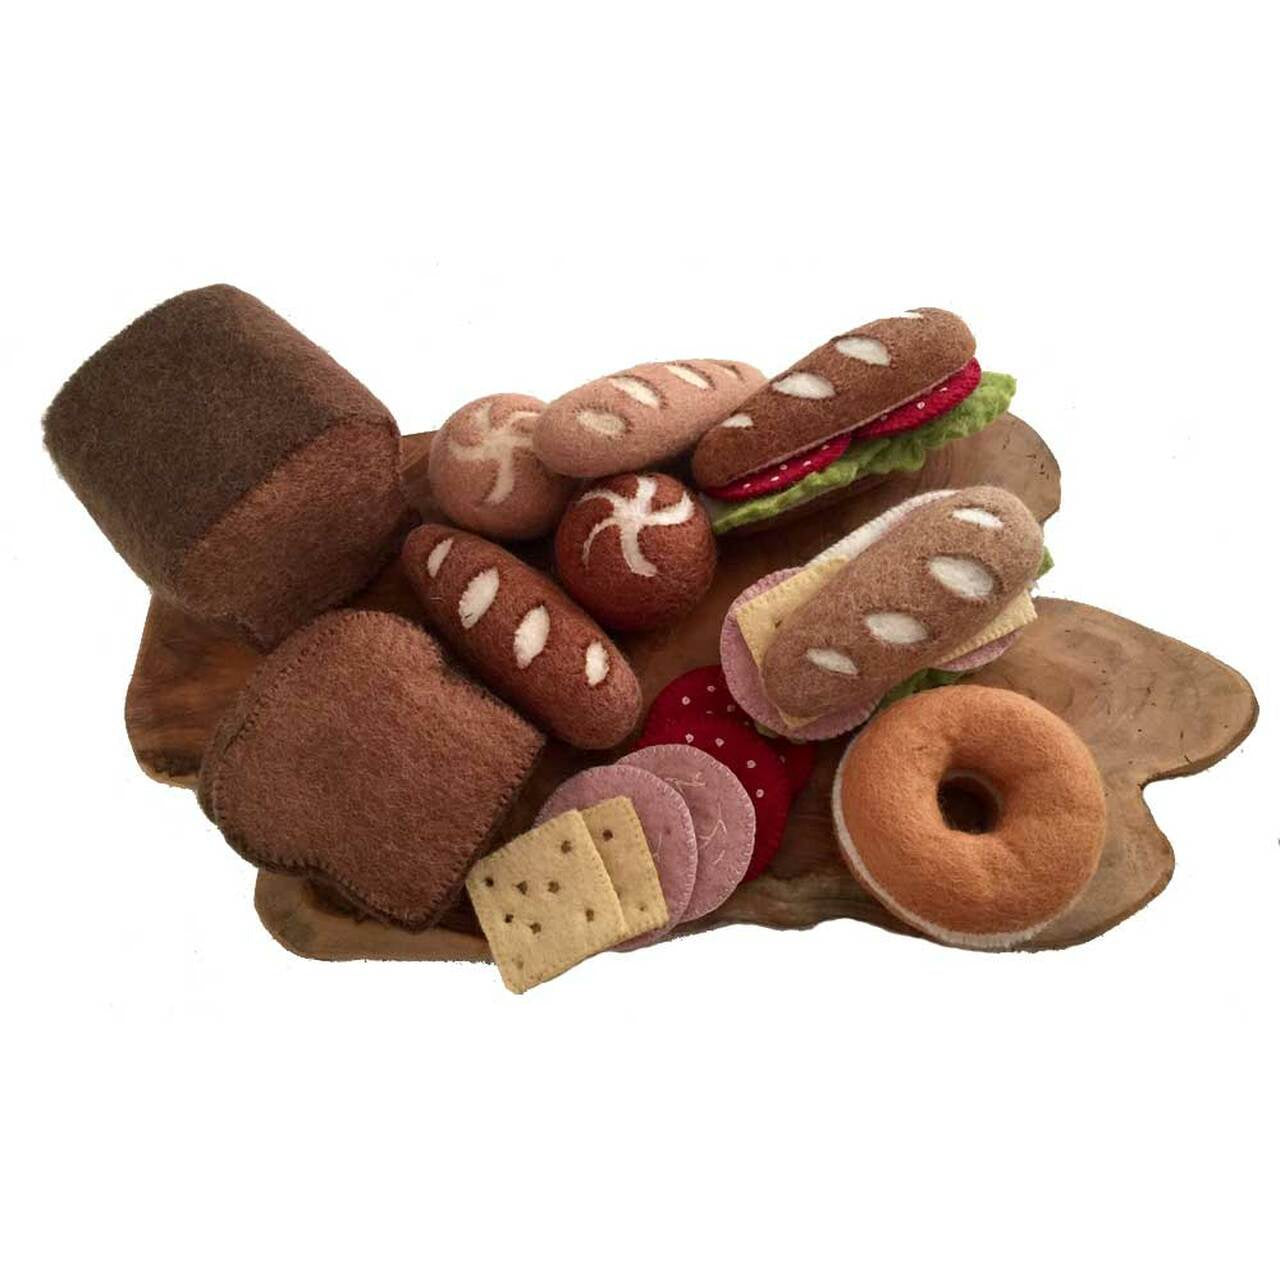 PAPOOSE - Food - Deluxe Bread Set/34pc